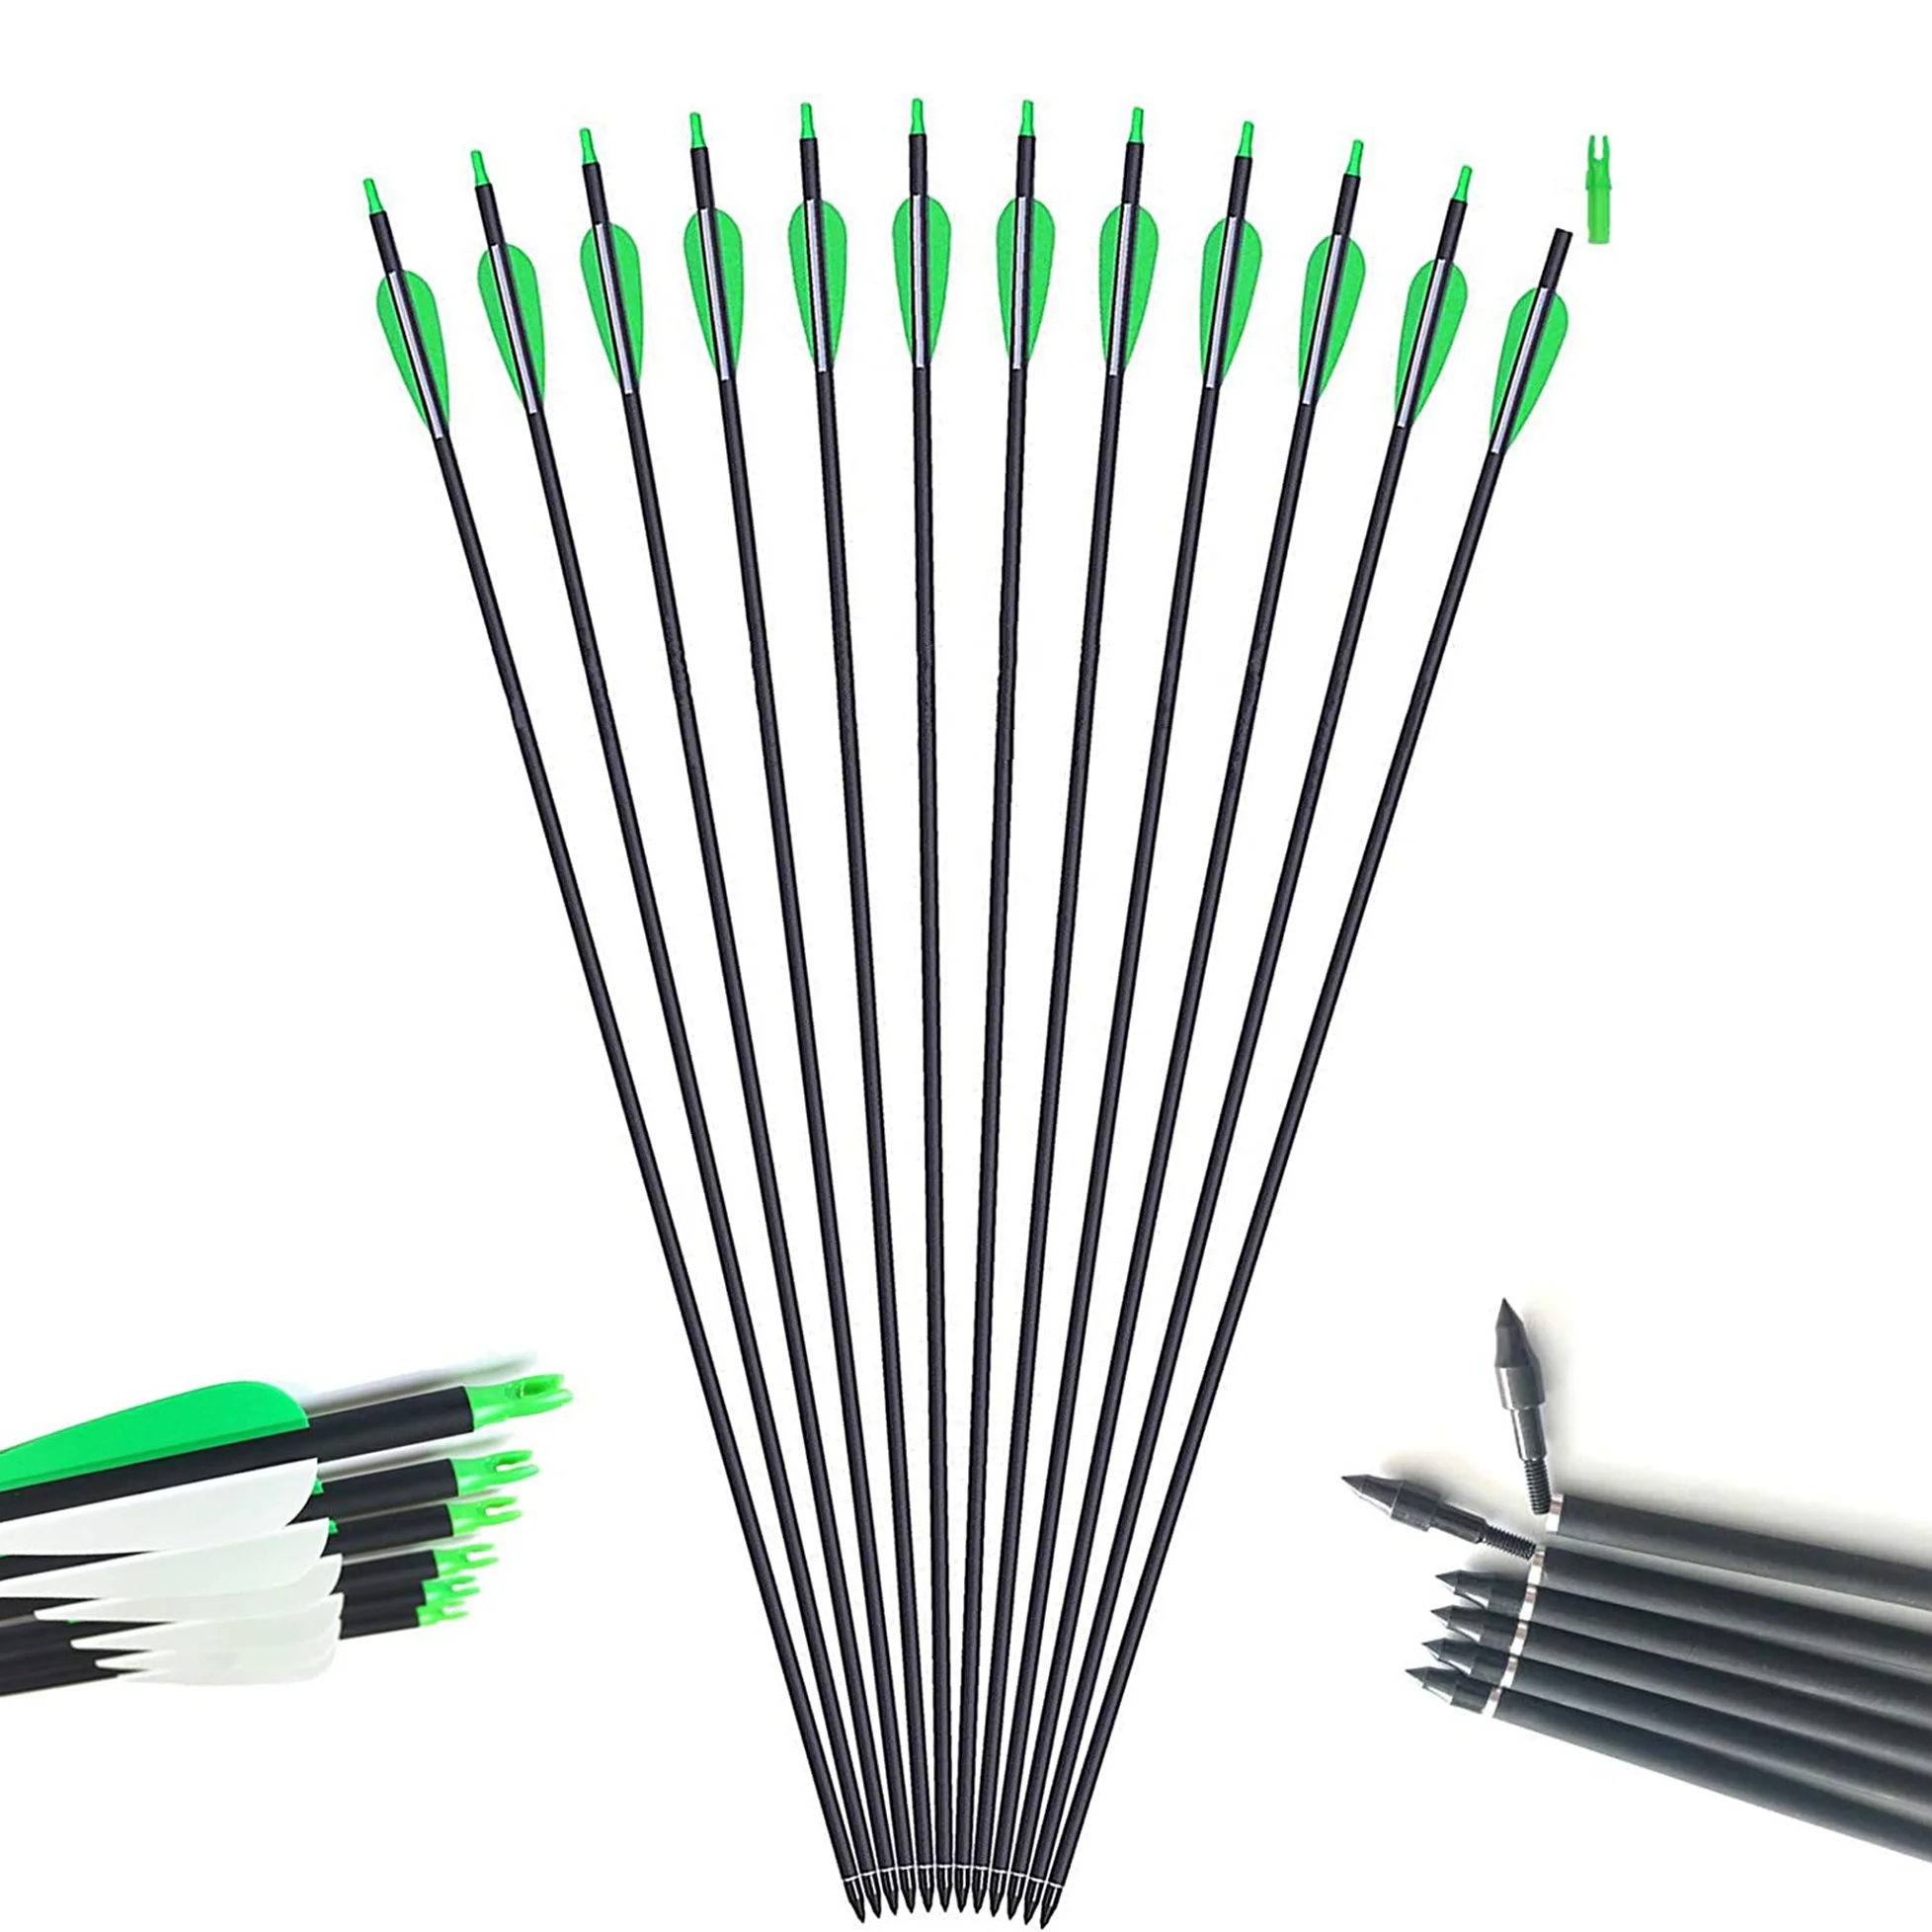 

30 inch mixed carbon arrow practice archery aiming compound bow and anti-bow carbon aiming arrow